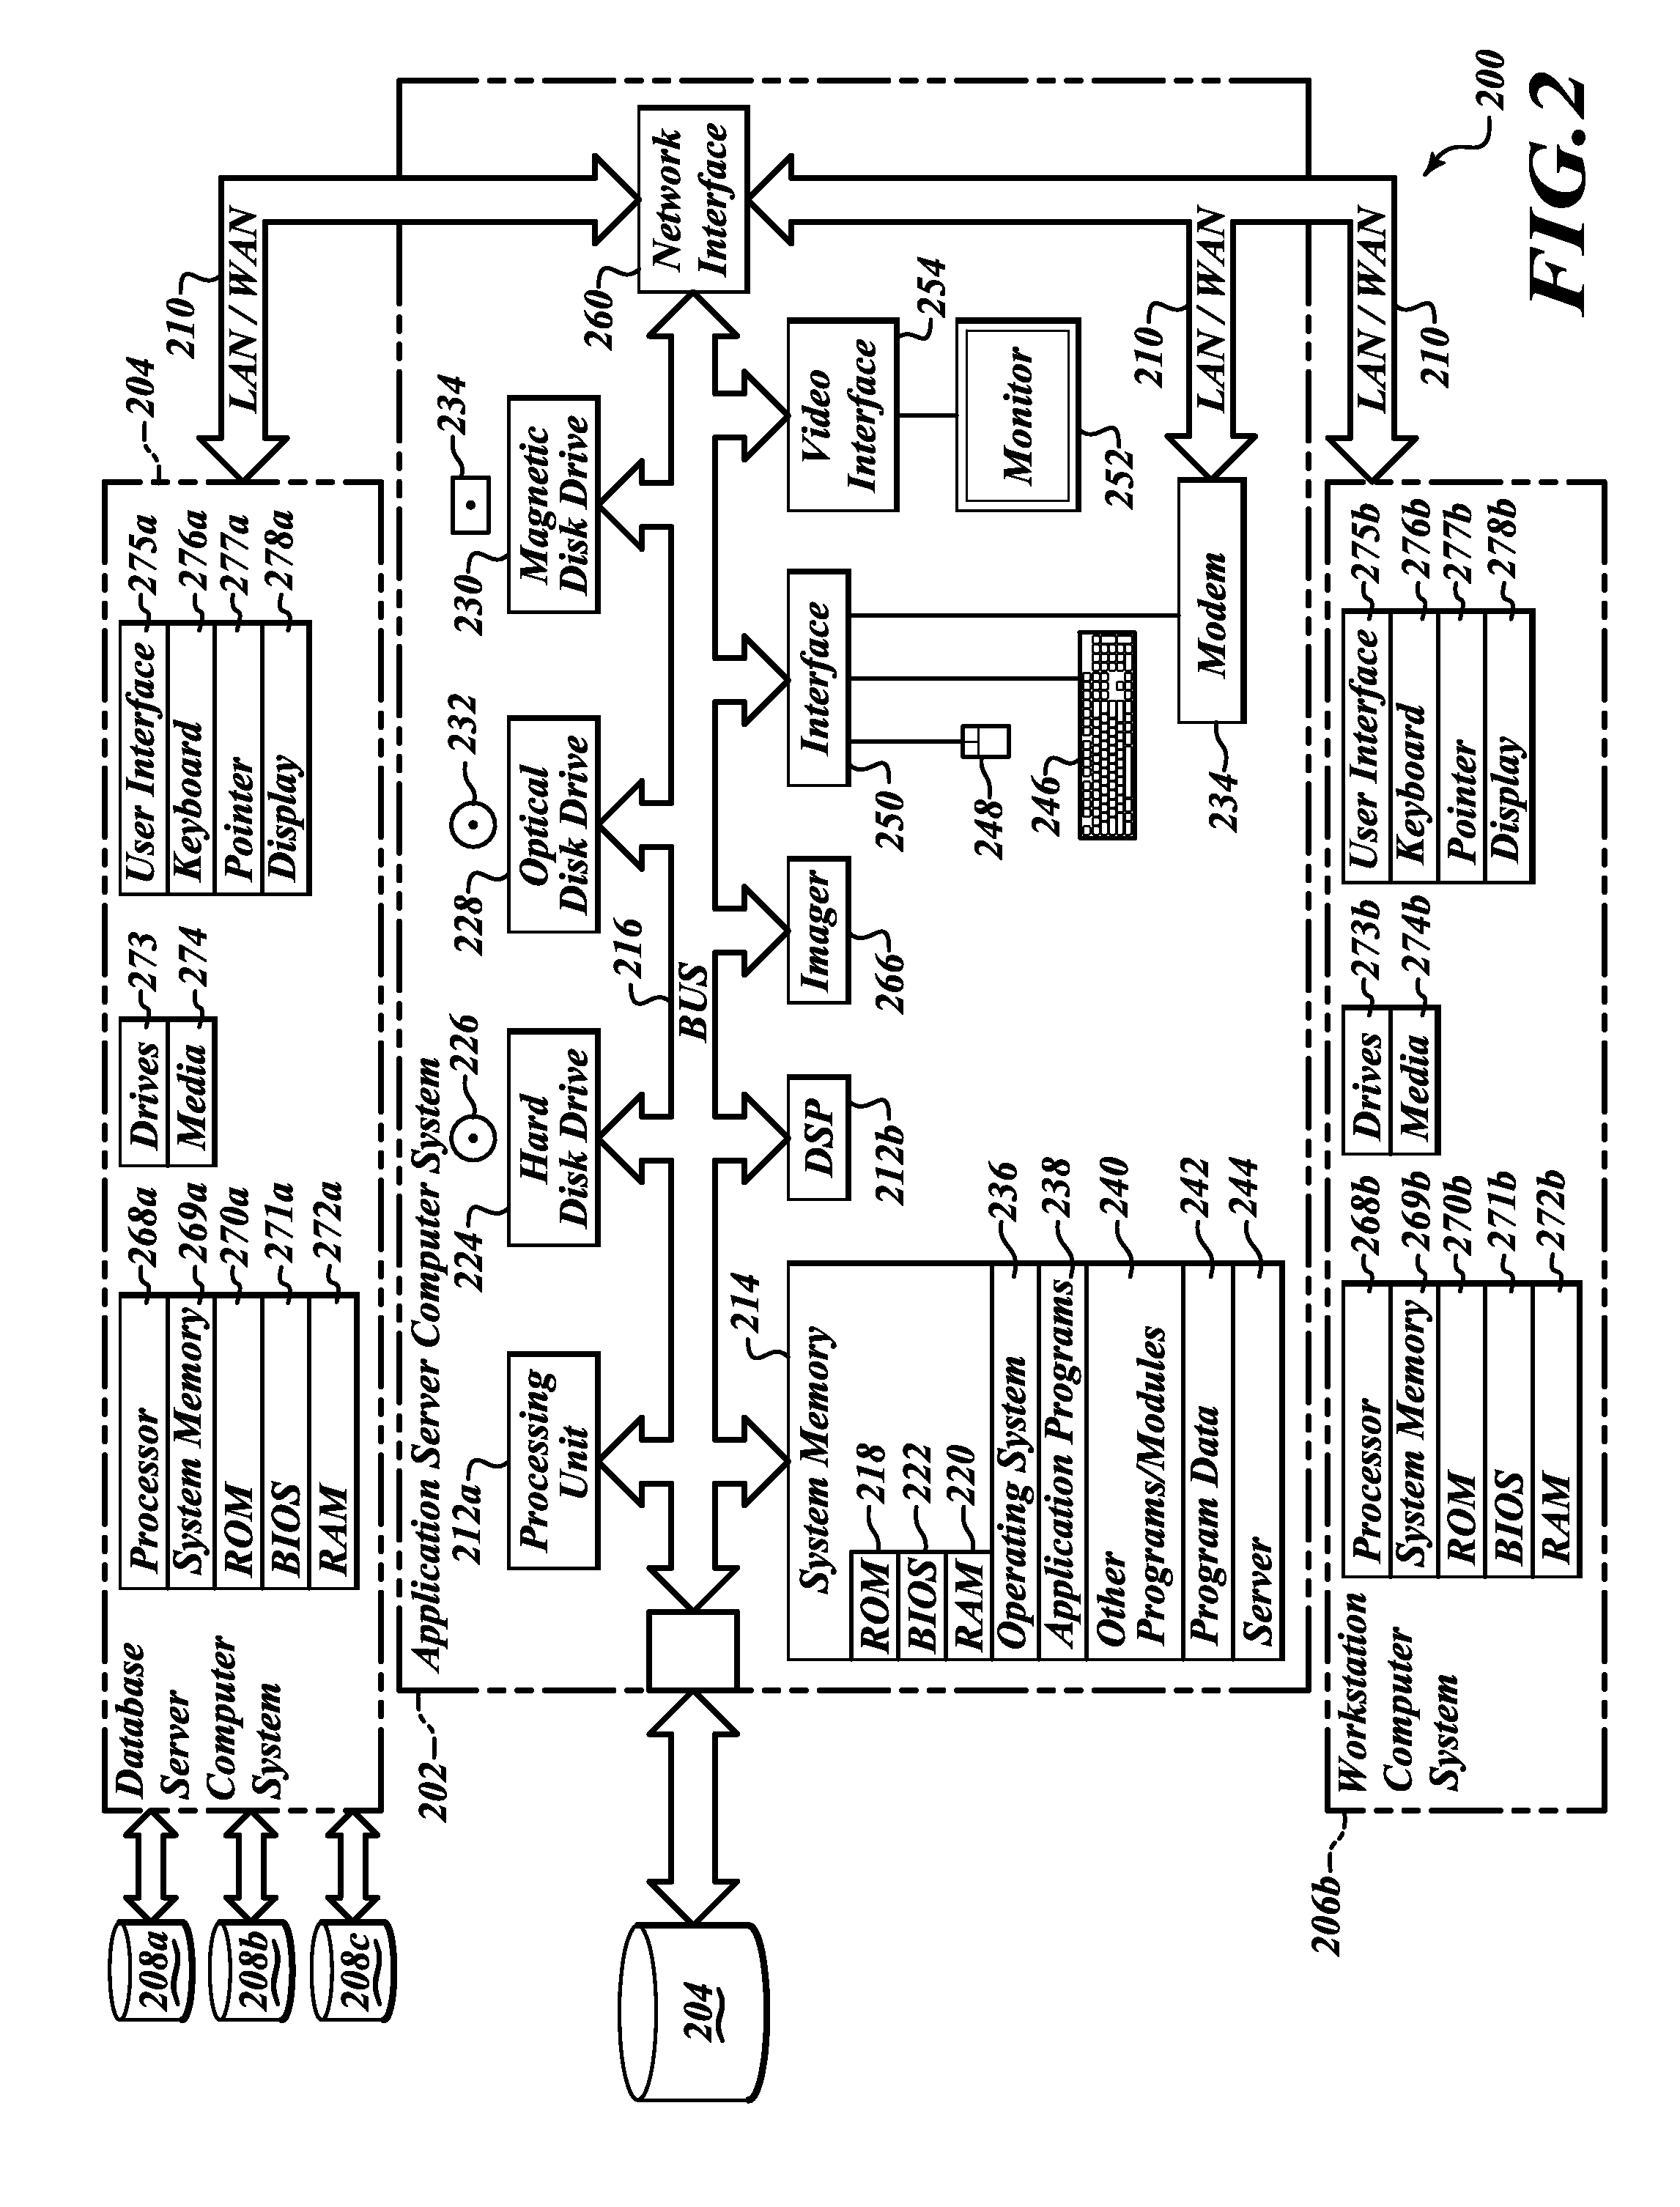 Systems, methods and articles for template based generation of markup documents to access back office systems